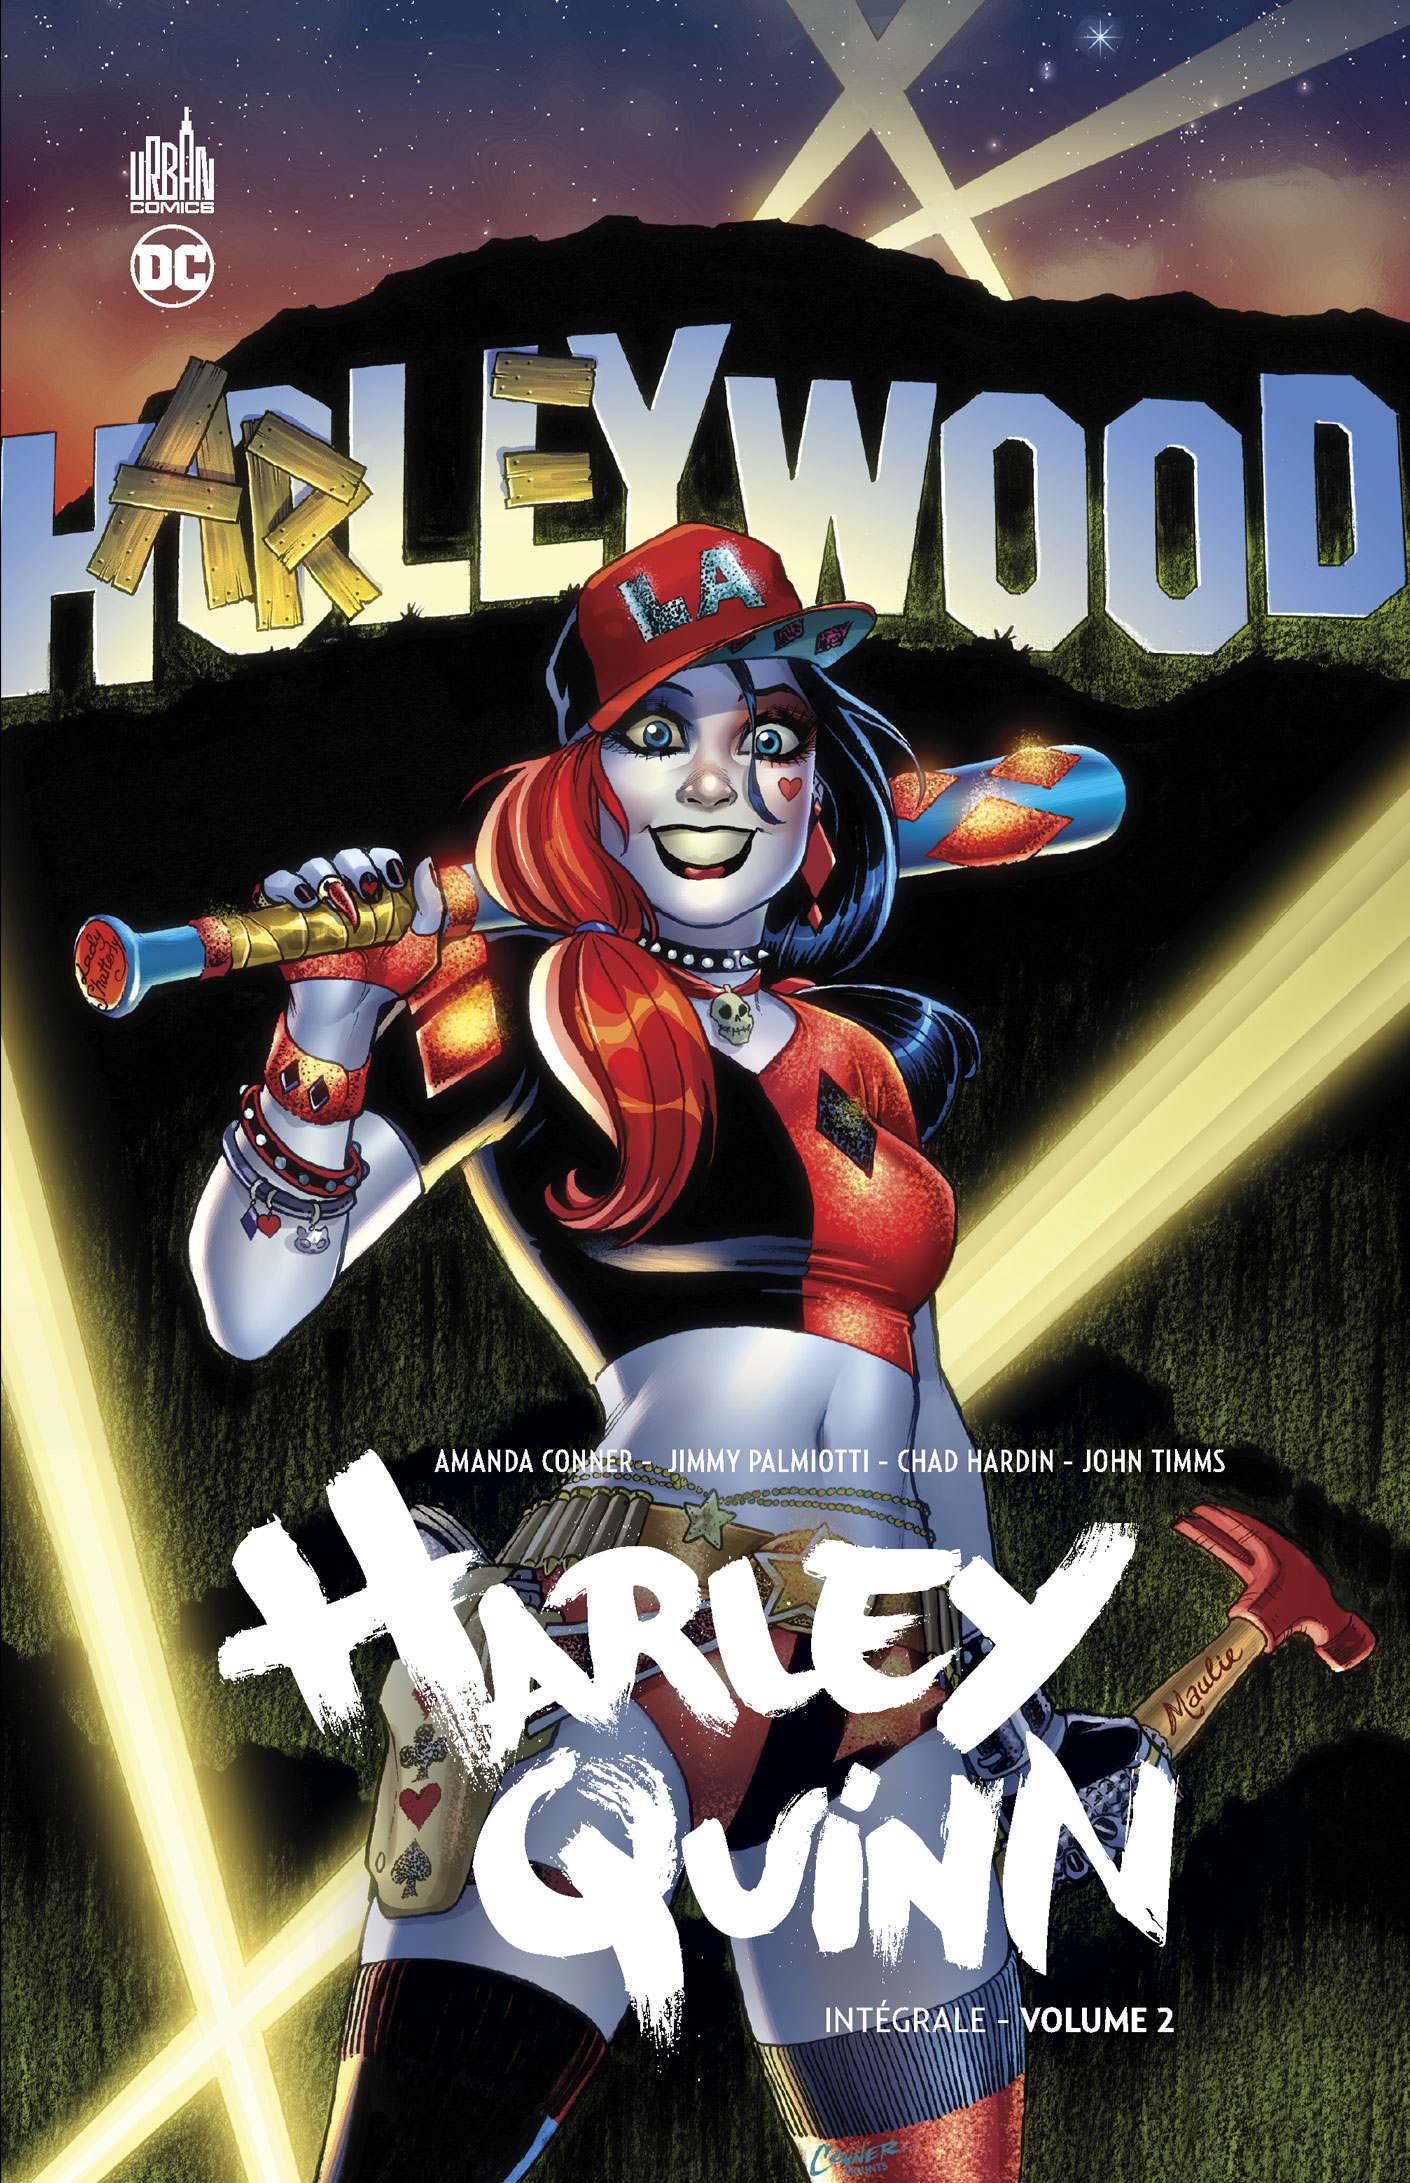 Harley Quinn intégrale – Tome 2 - couv